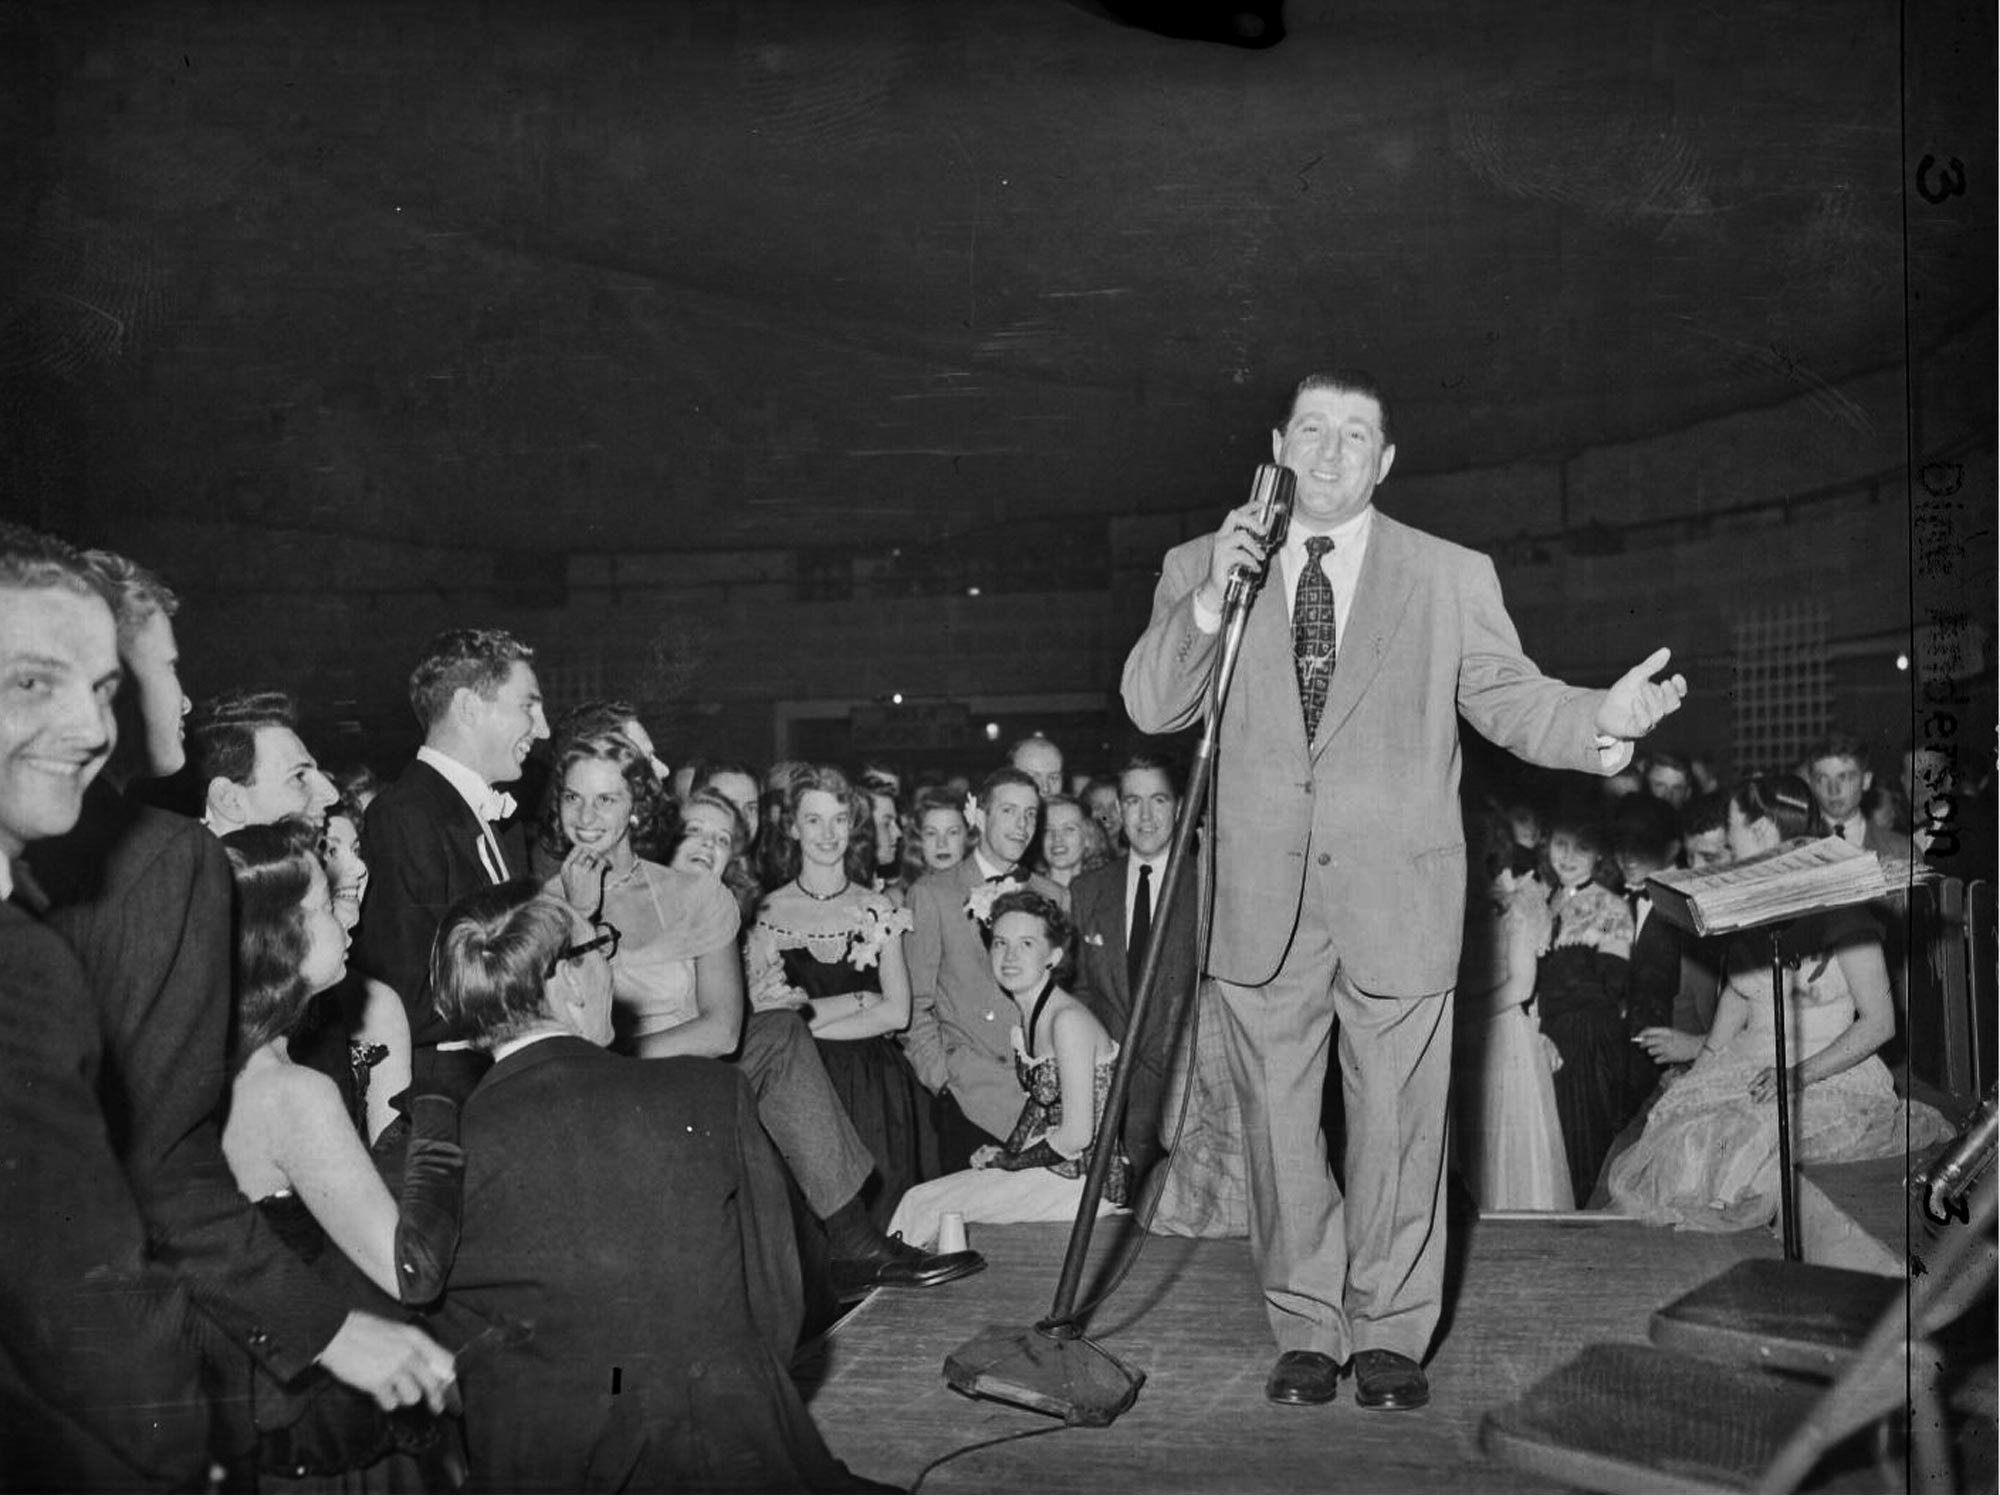 An old black and white photo of Tony Bennett singing on a stage at UVA